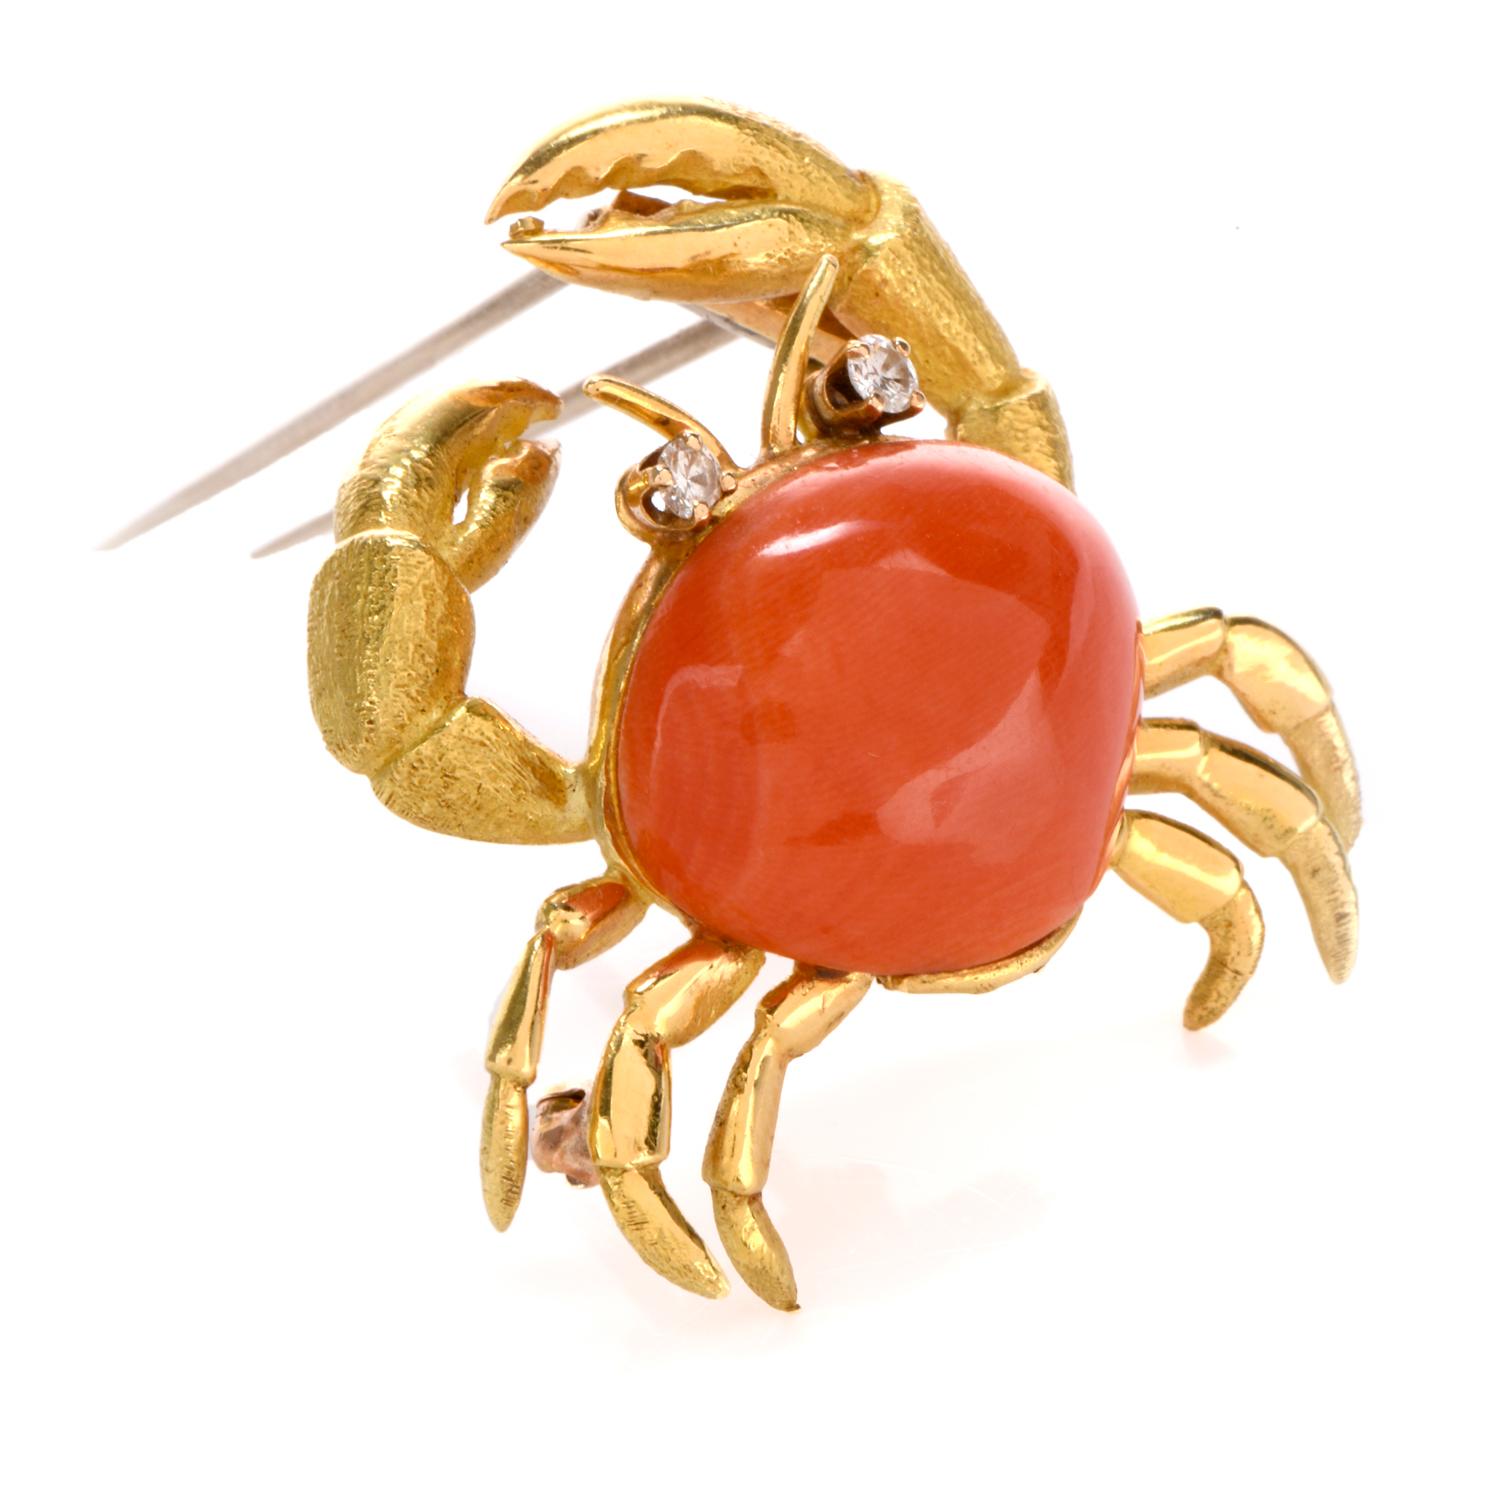 This excusite 1980's Tiffany and Co lapel pin displays a sand crab design motif and is crafted in bright glowing 18k gold.
The brooch commands attention with a beautiful cabochon cut oval shaped genuine coral as the
center focus and body and then